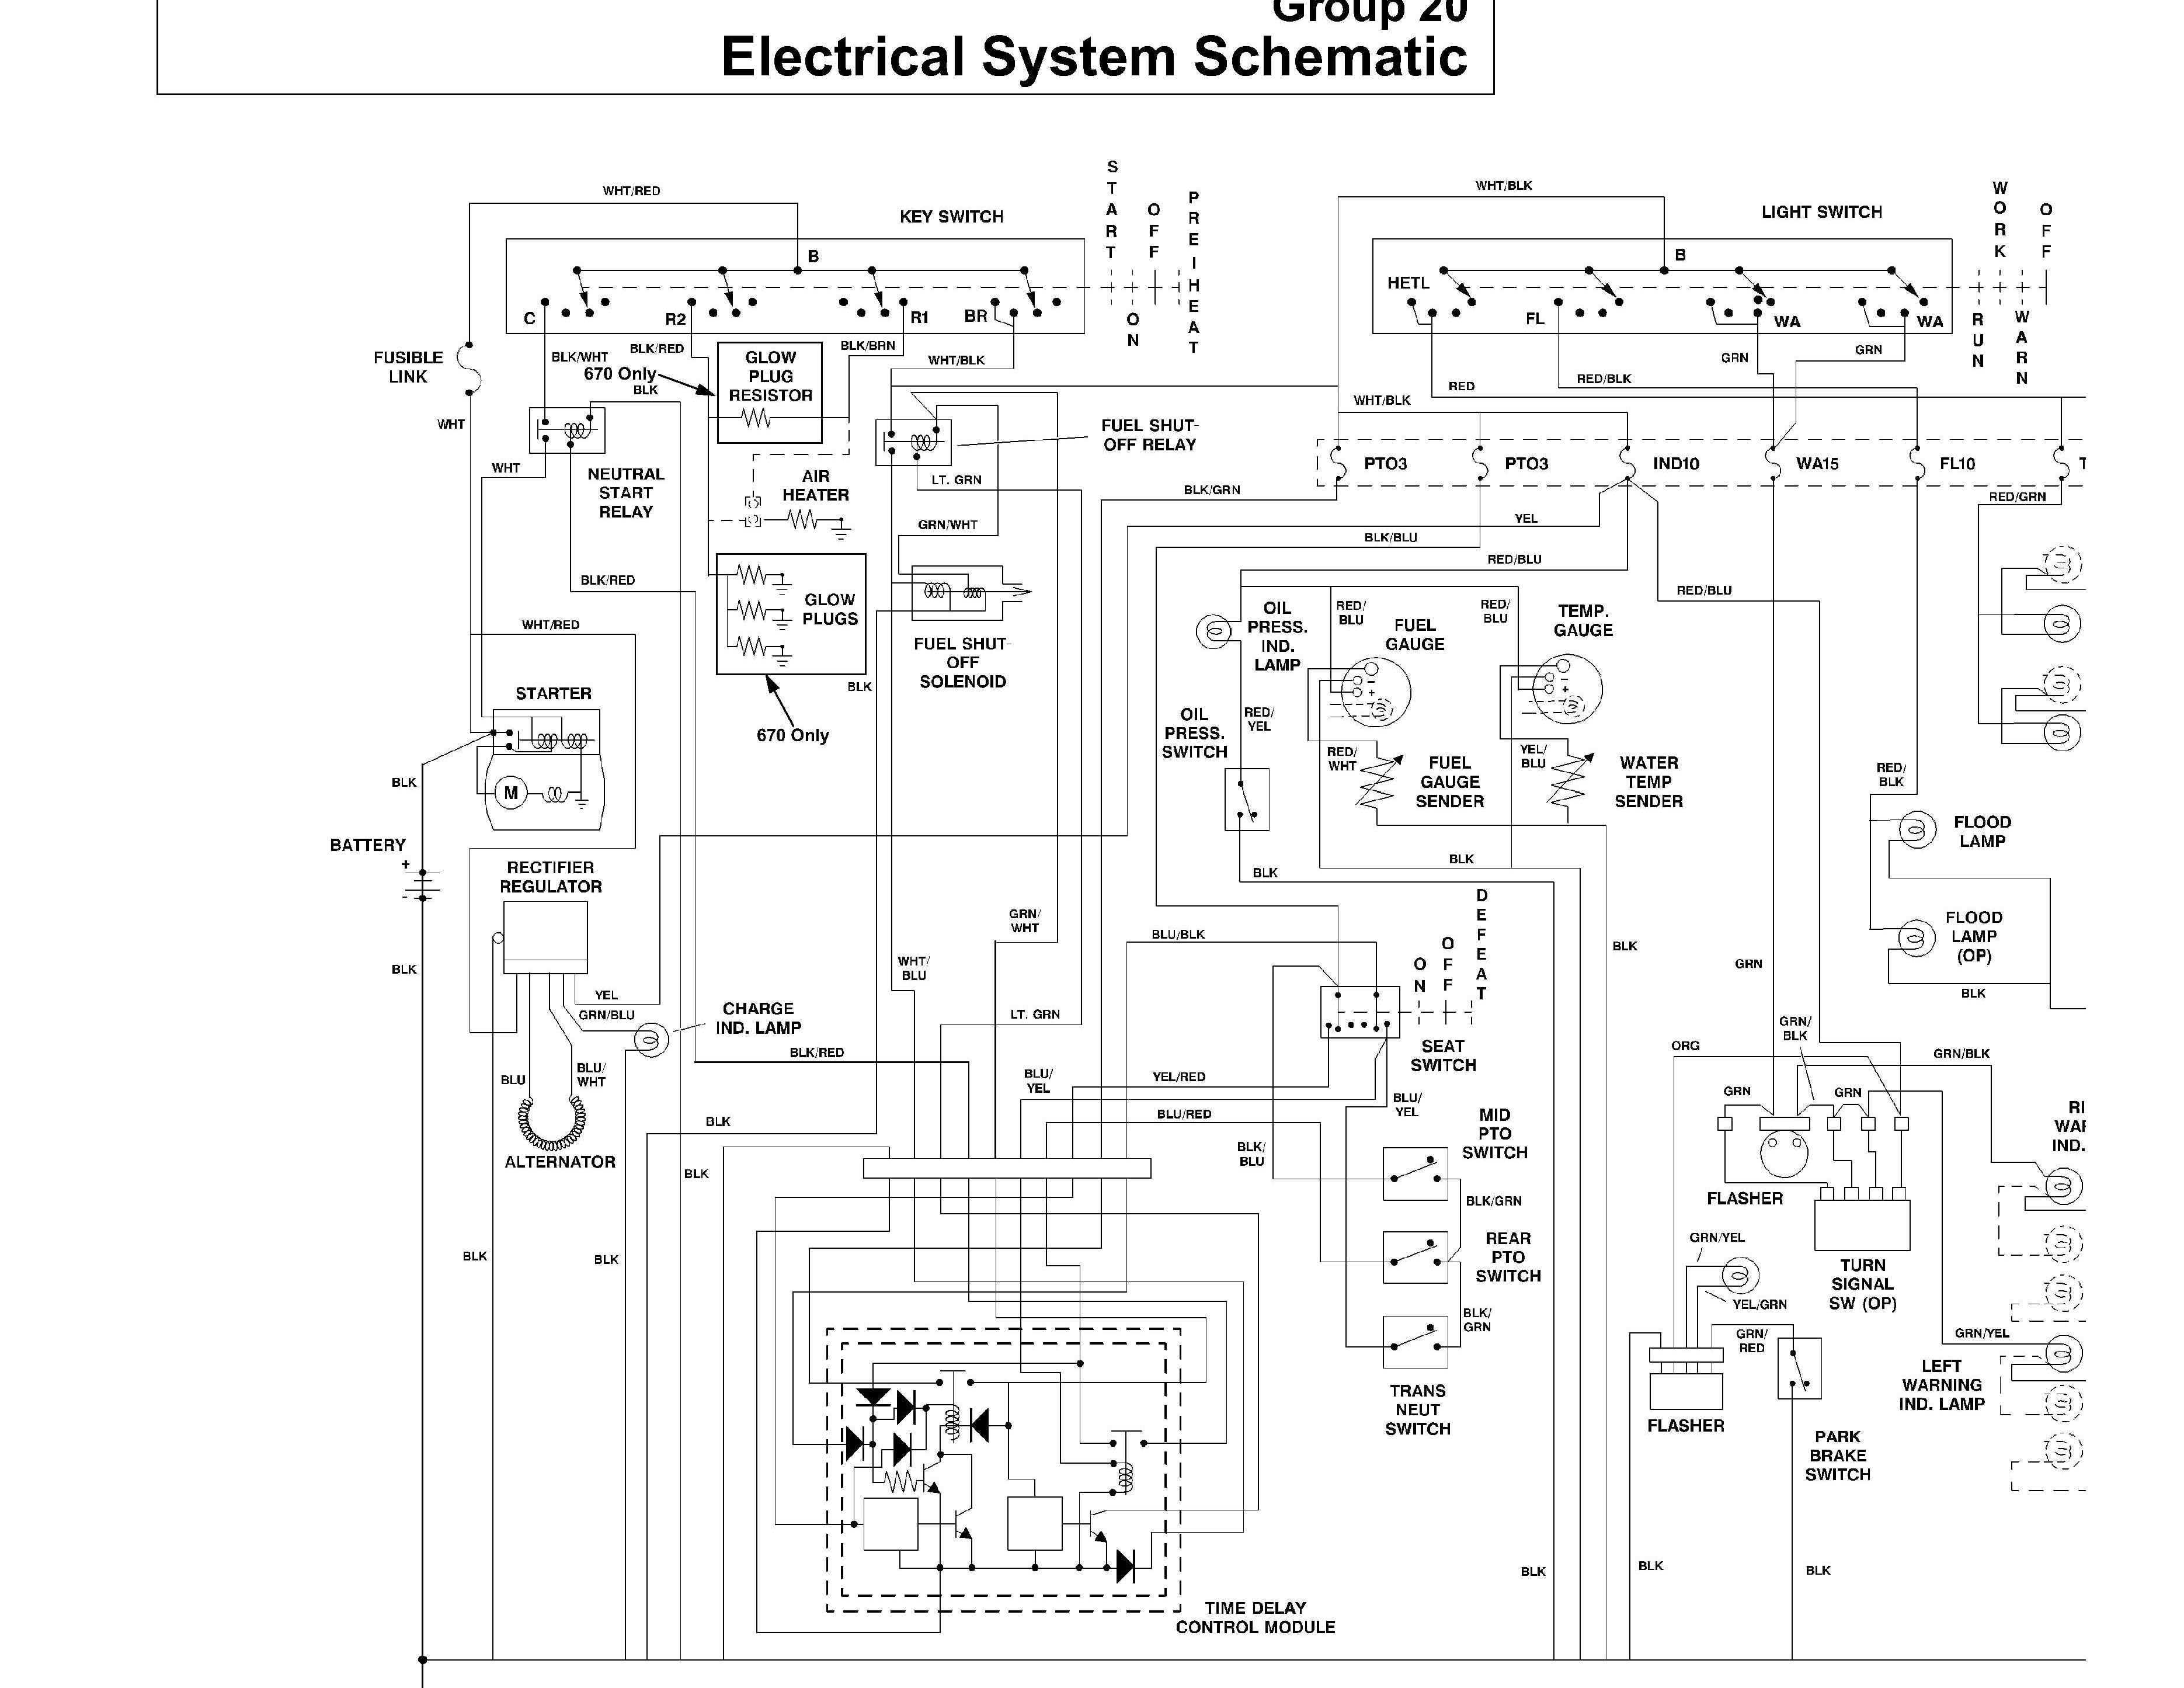 John Deere Wiring Diagrams 8 Wire thermostat Wiring Diagram Hbphelp Of John Deere Wiring Diagrams